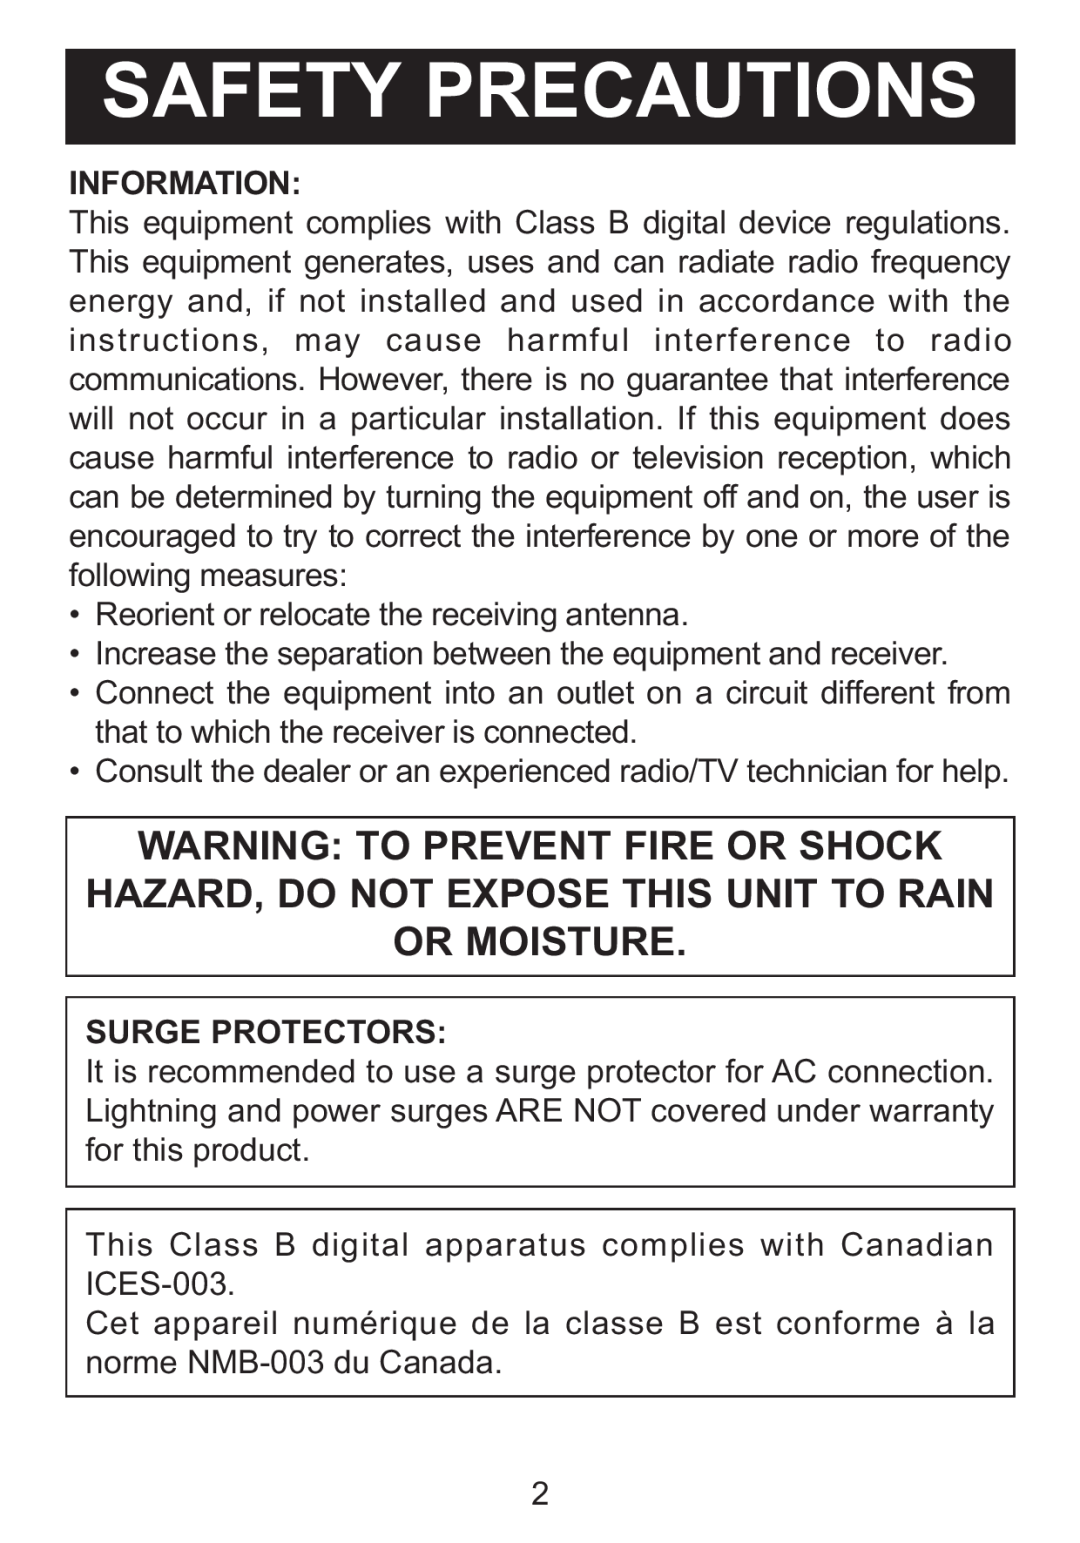 Memorex MDF8402-LWD, MDF8402-DWD manual Safety Precautions, Warning To Prevent Fire Or Shock, Information, Surge Protectors 